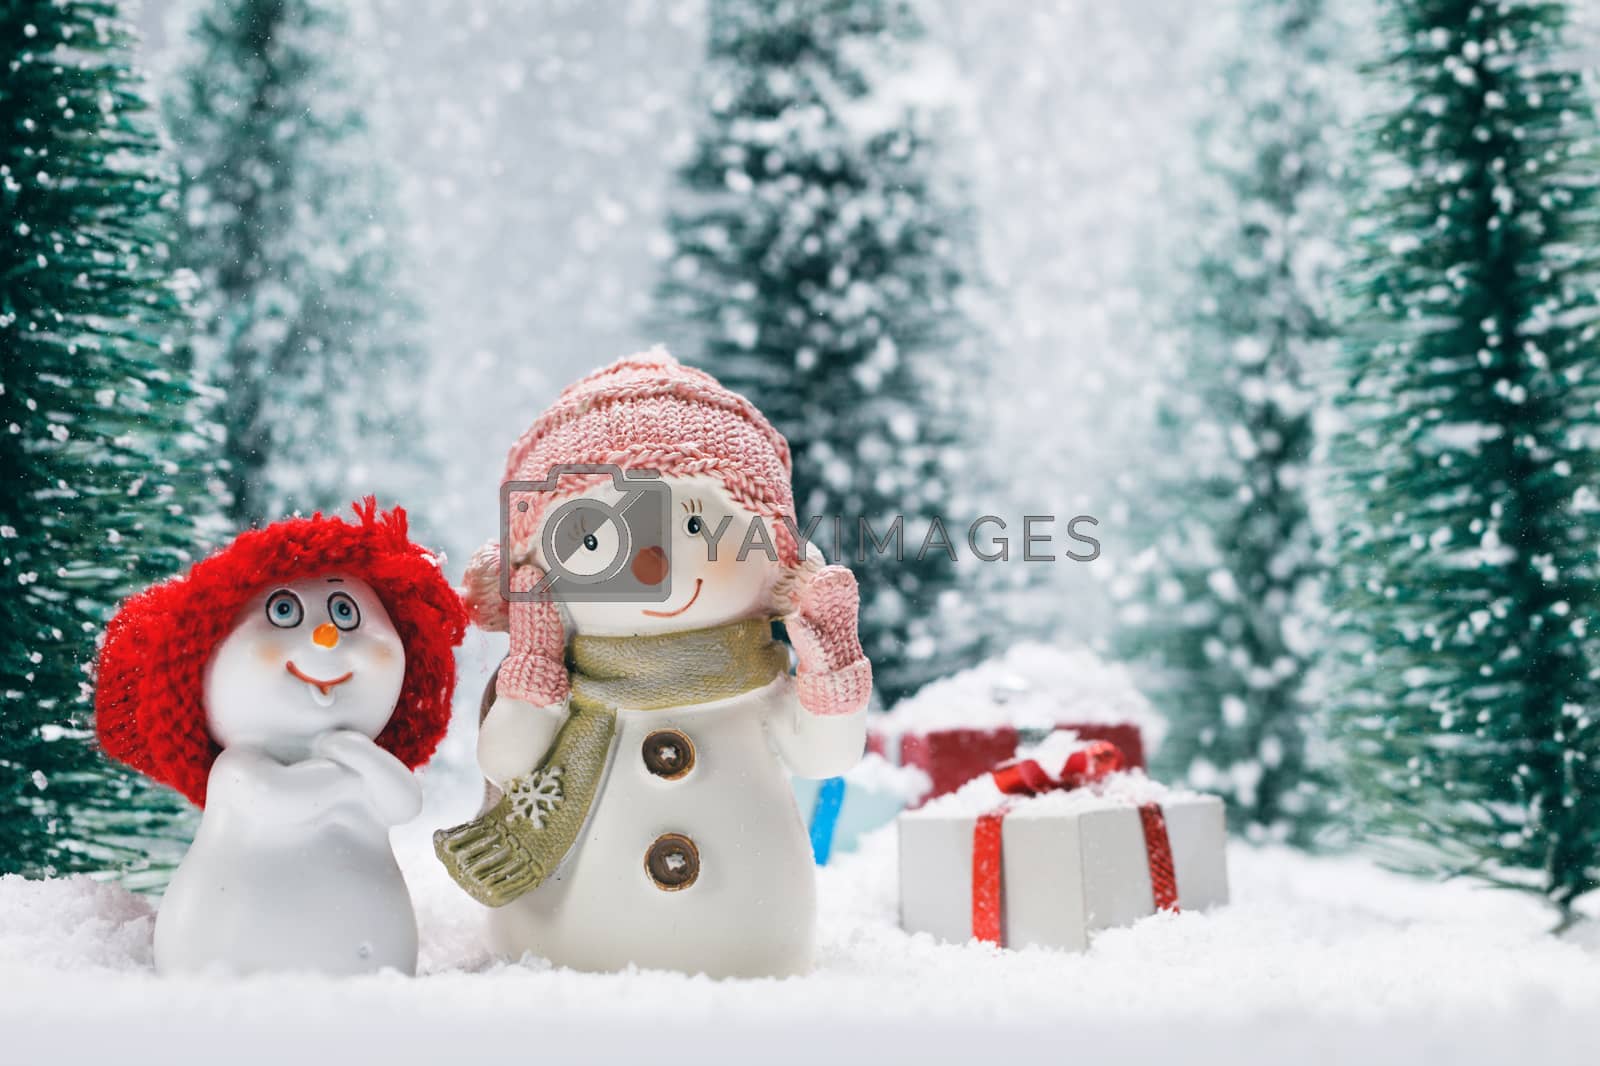 Royalty free image of Snowmen and gifts by Yellowj